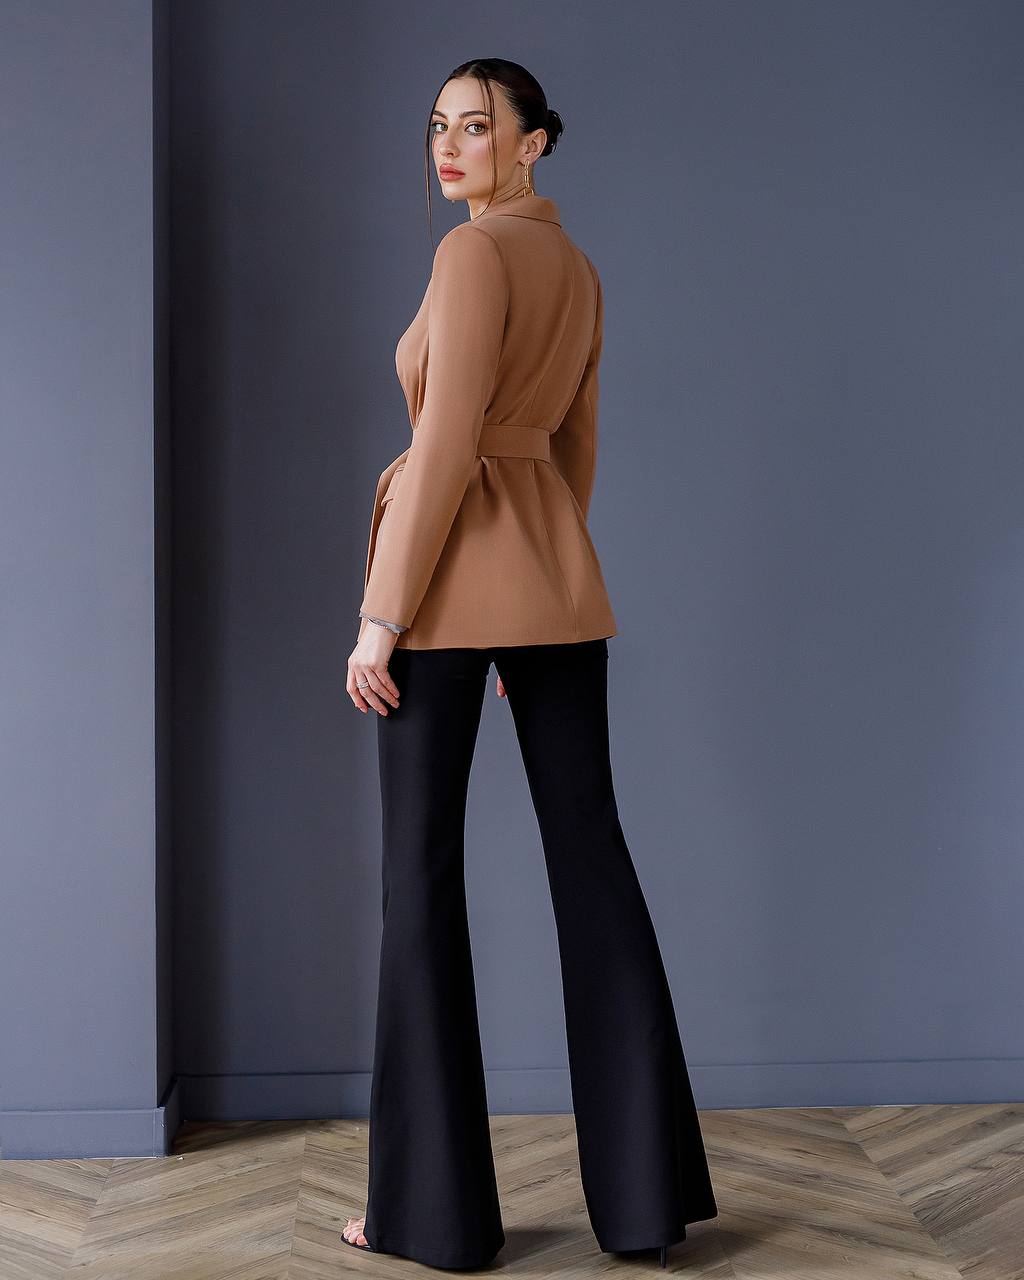 a woman in a brown top and black pants